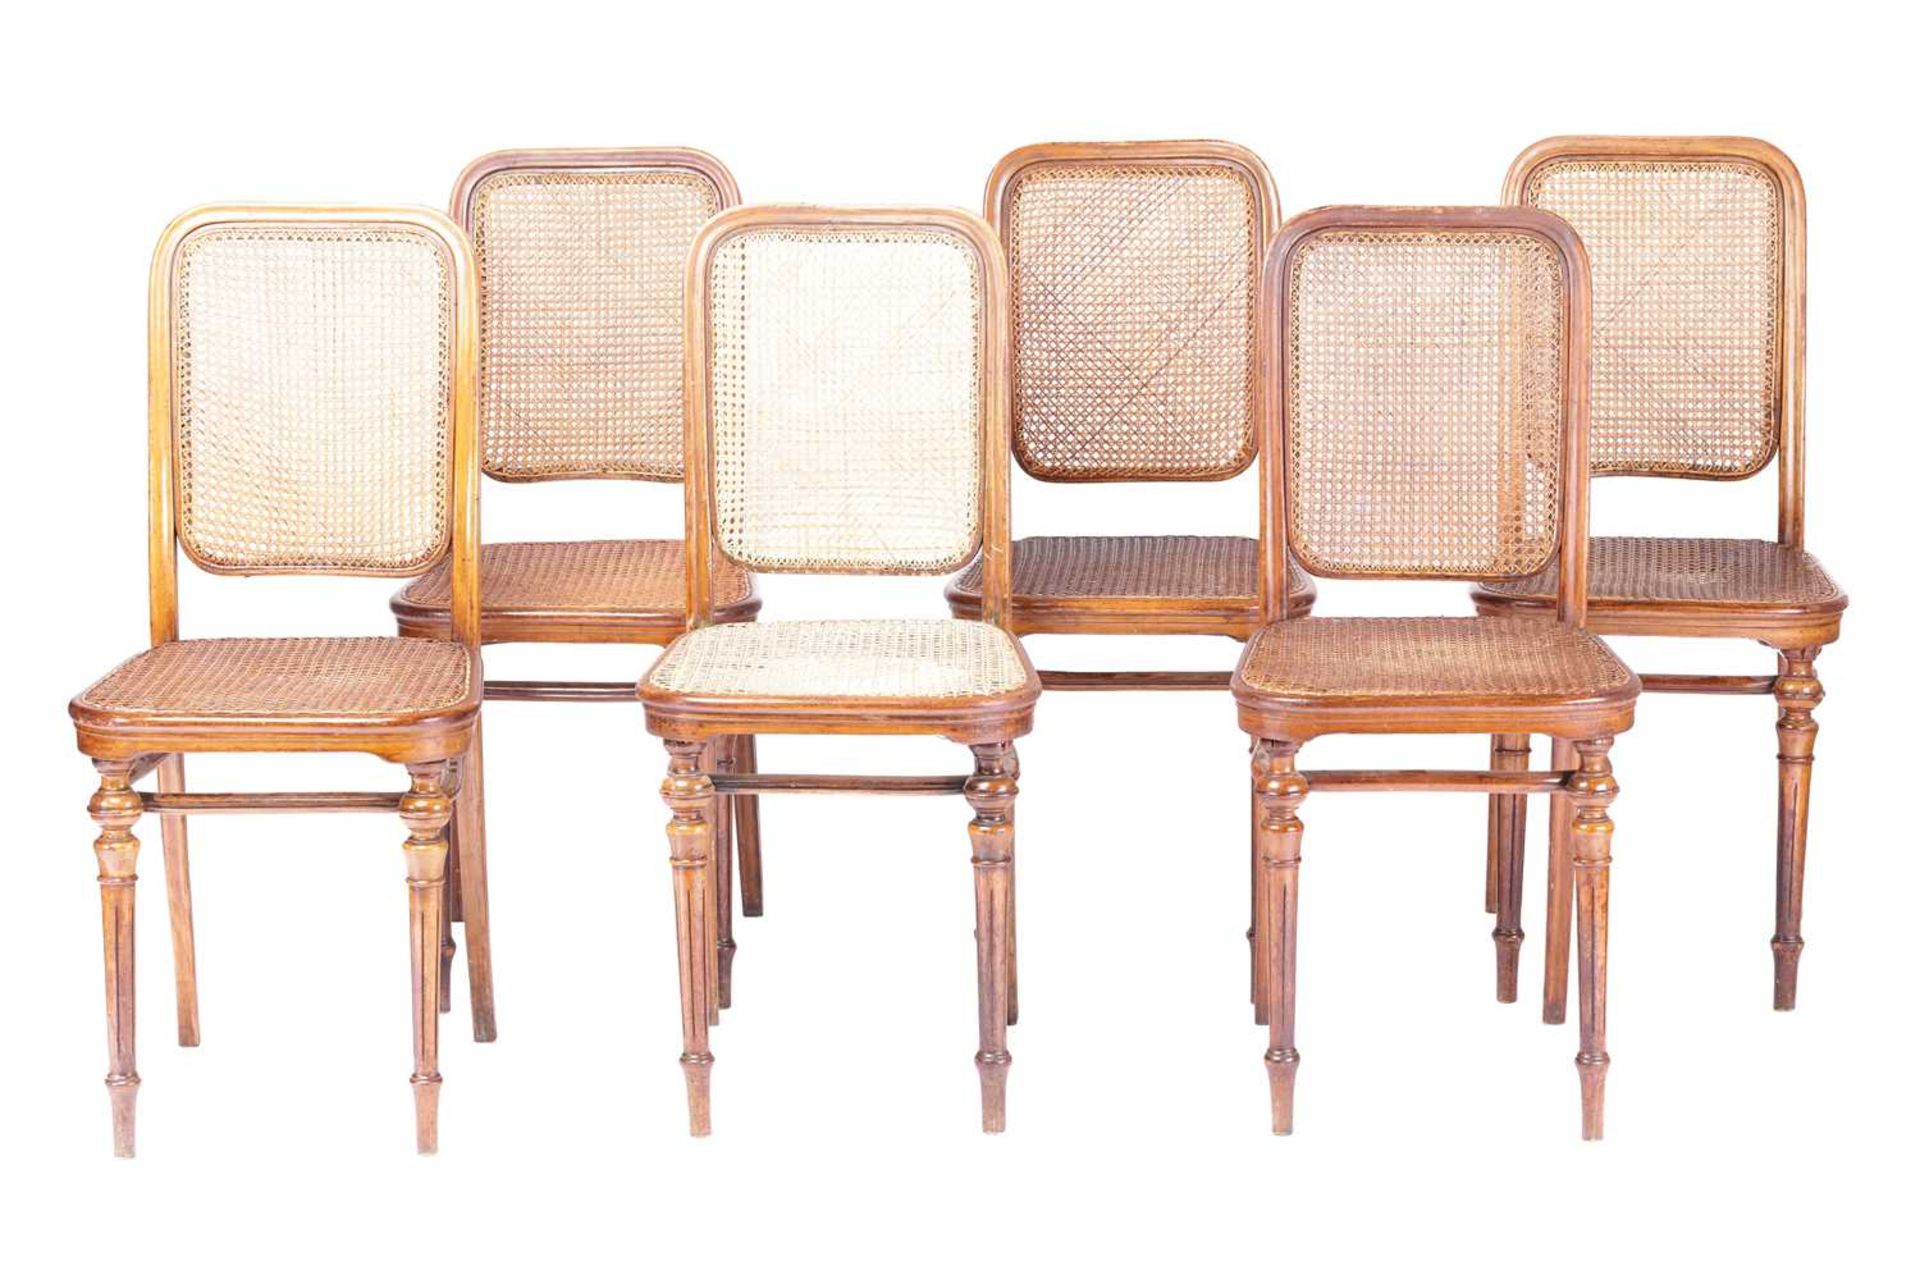 Gerbruder Thonet; Chair 436(variant) a set of six beechwood chairs, based on the chair designed in